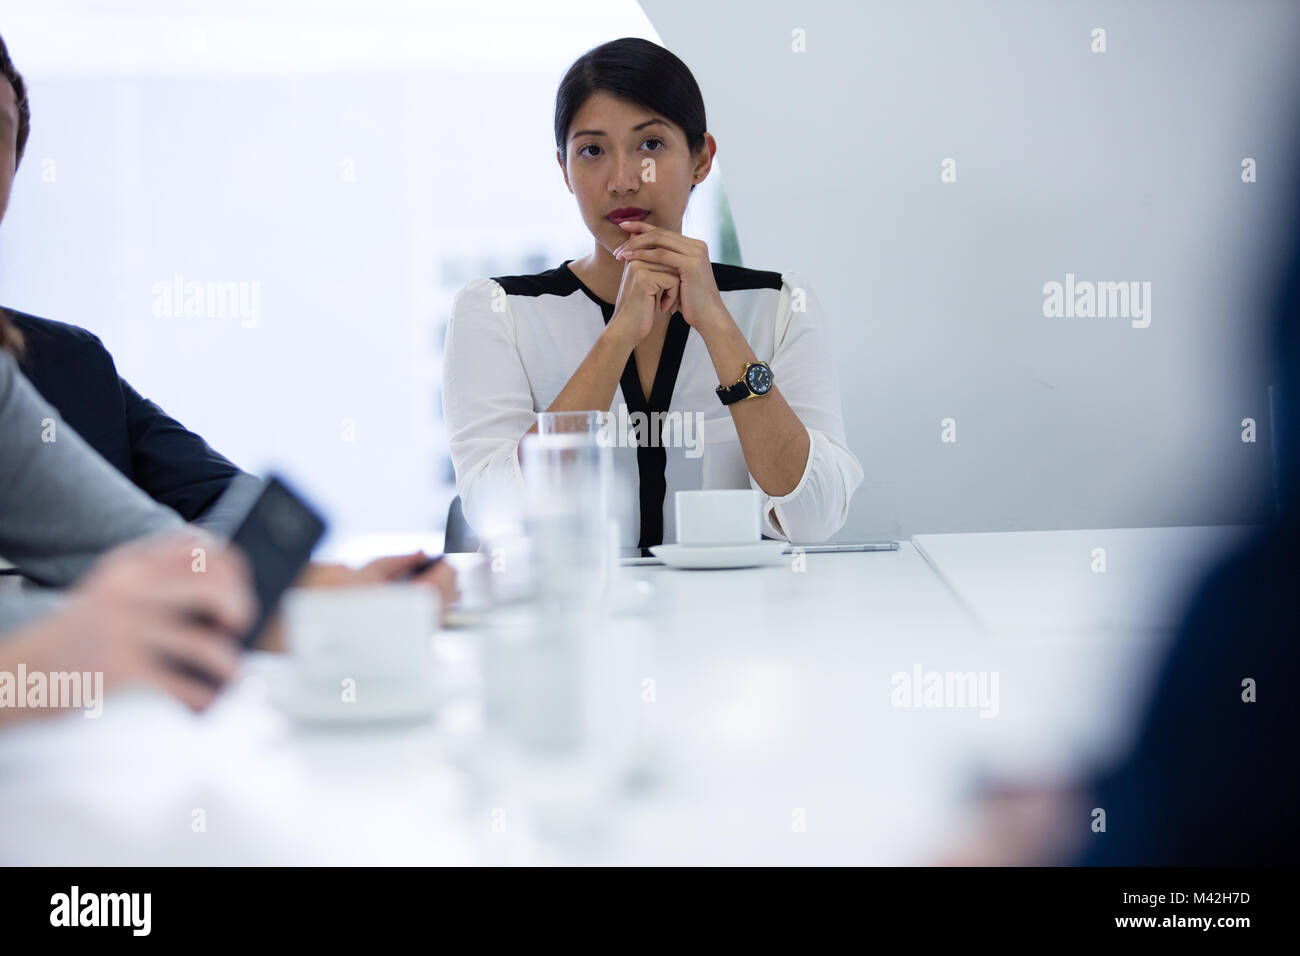 Female director listening in a business meeting Stock Photo